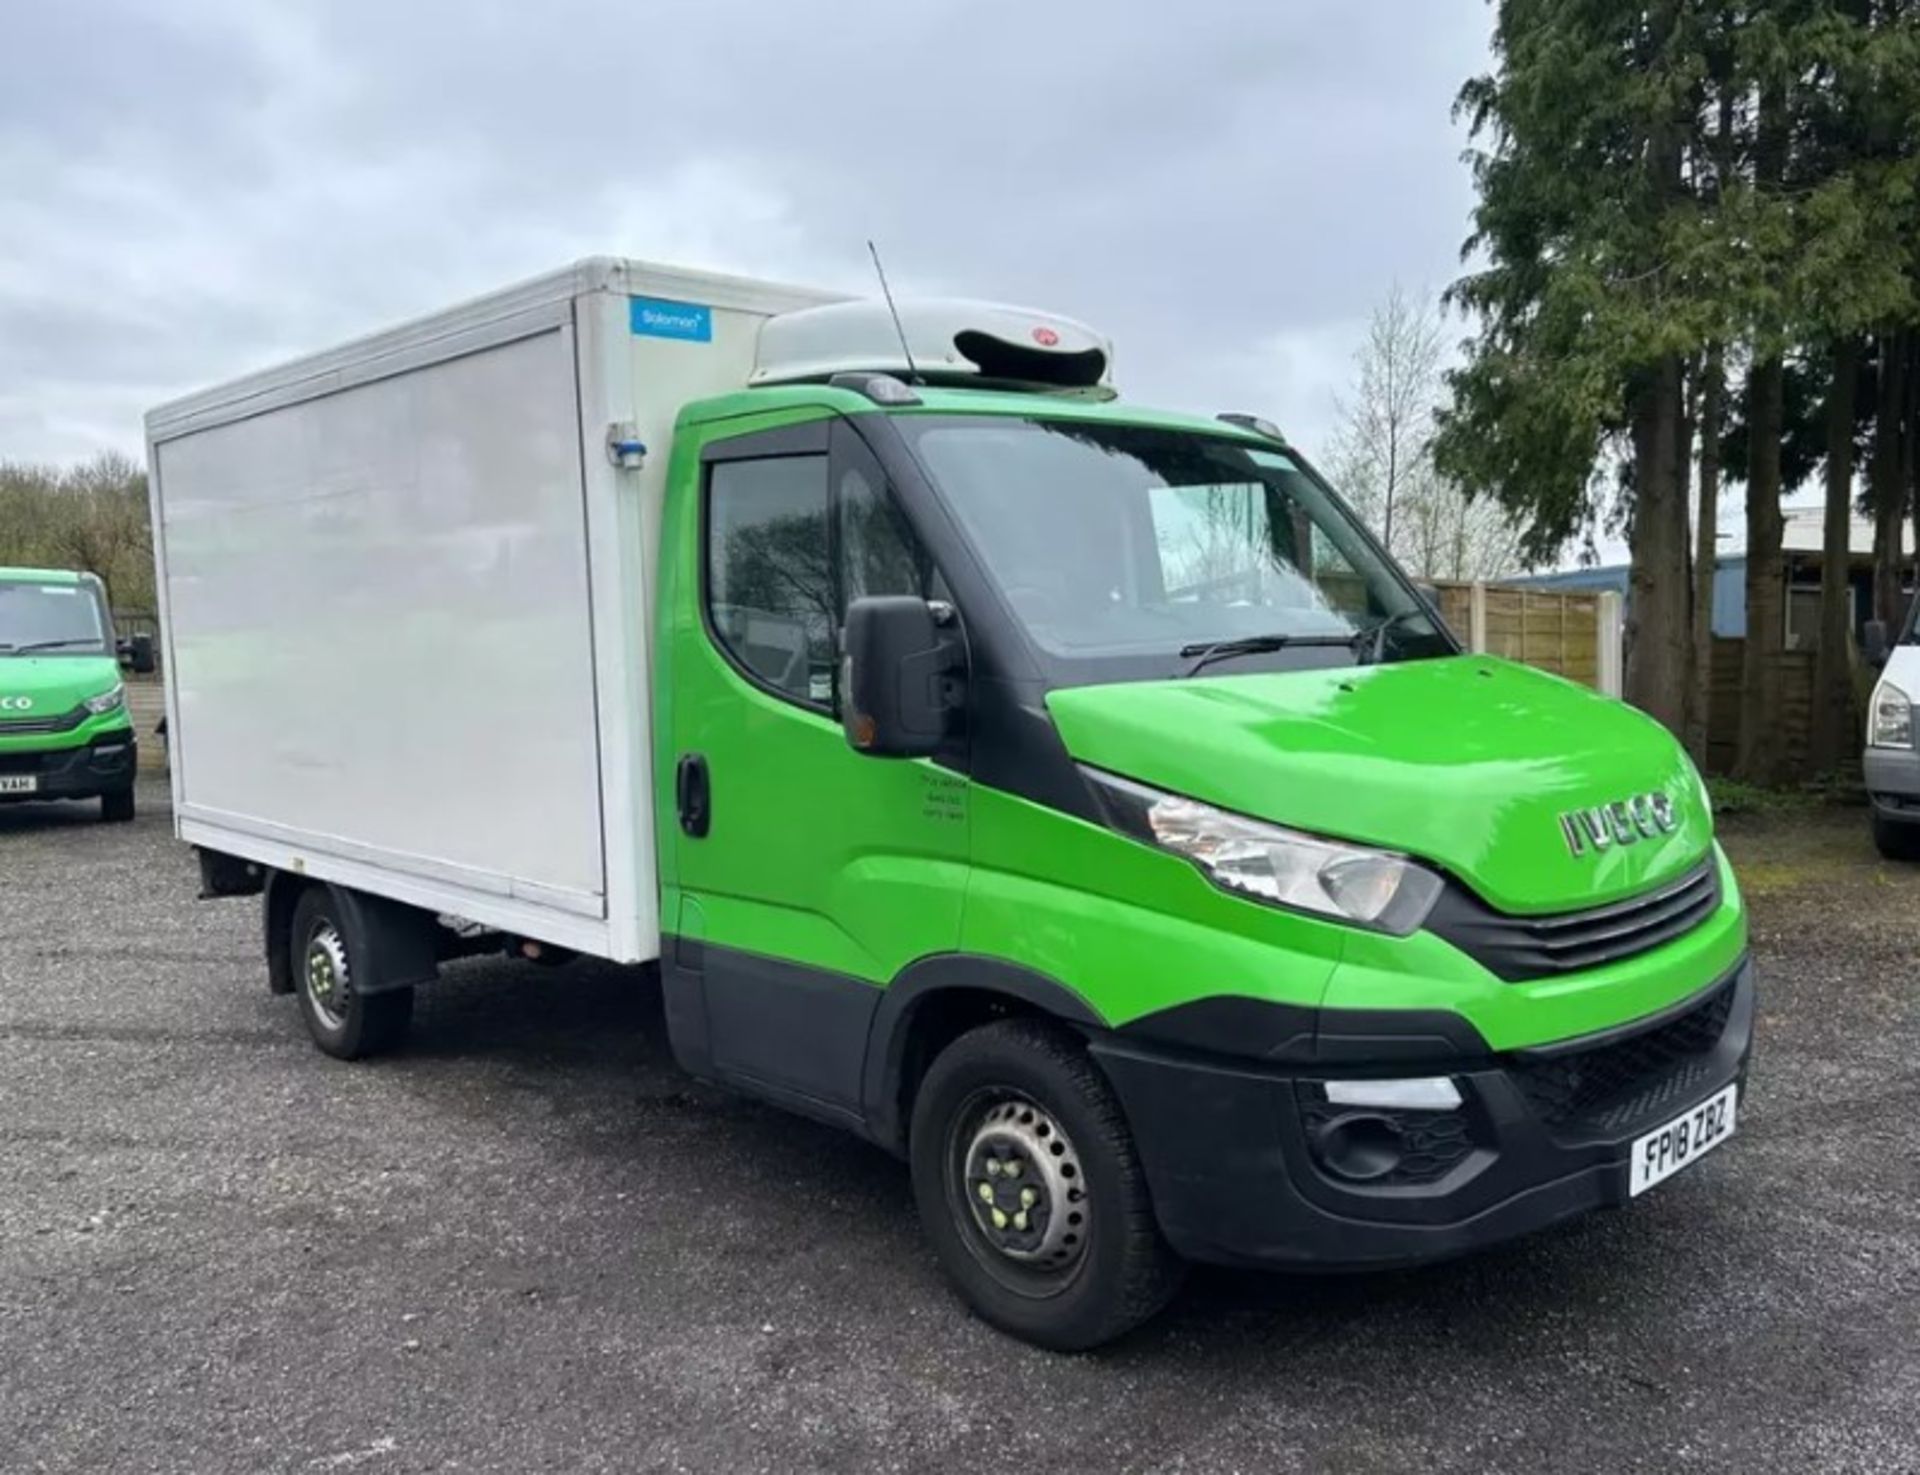 >>>SPECIAL CLEARANCE<<< EXCEPTIONAL PERFORMANCE AND VERSATILITY: 2018 IVECO DAILY 35S12 CHASSIS CAB